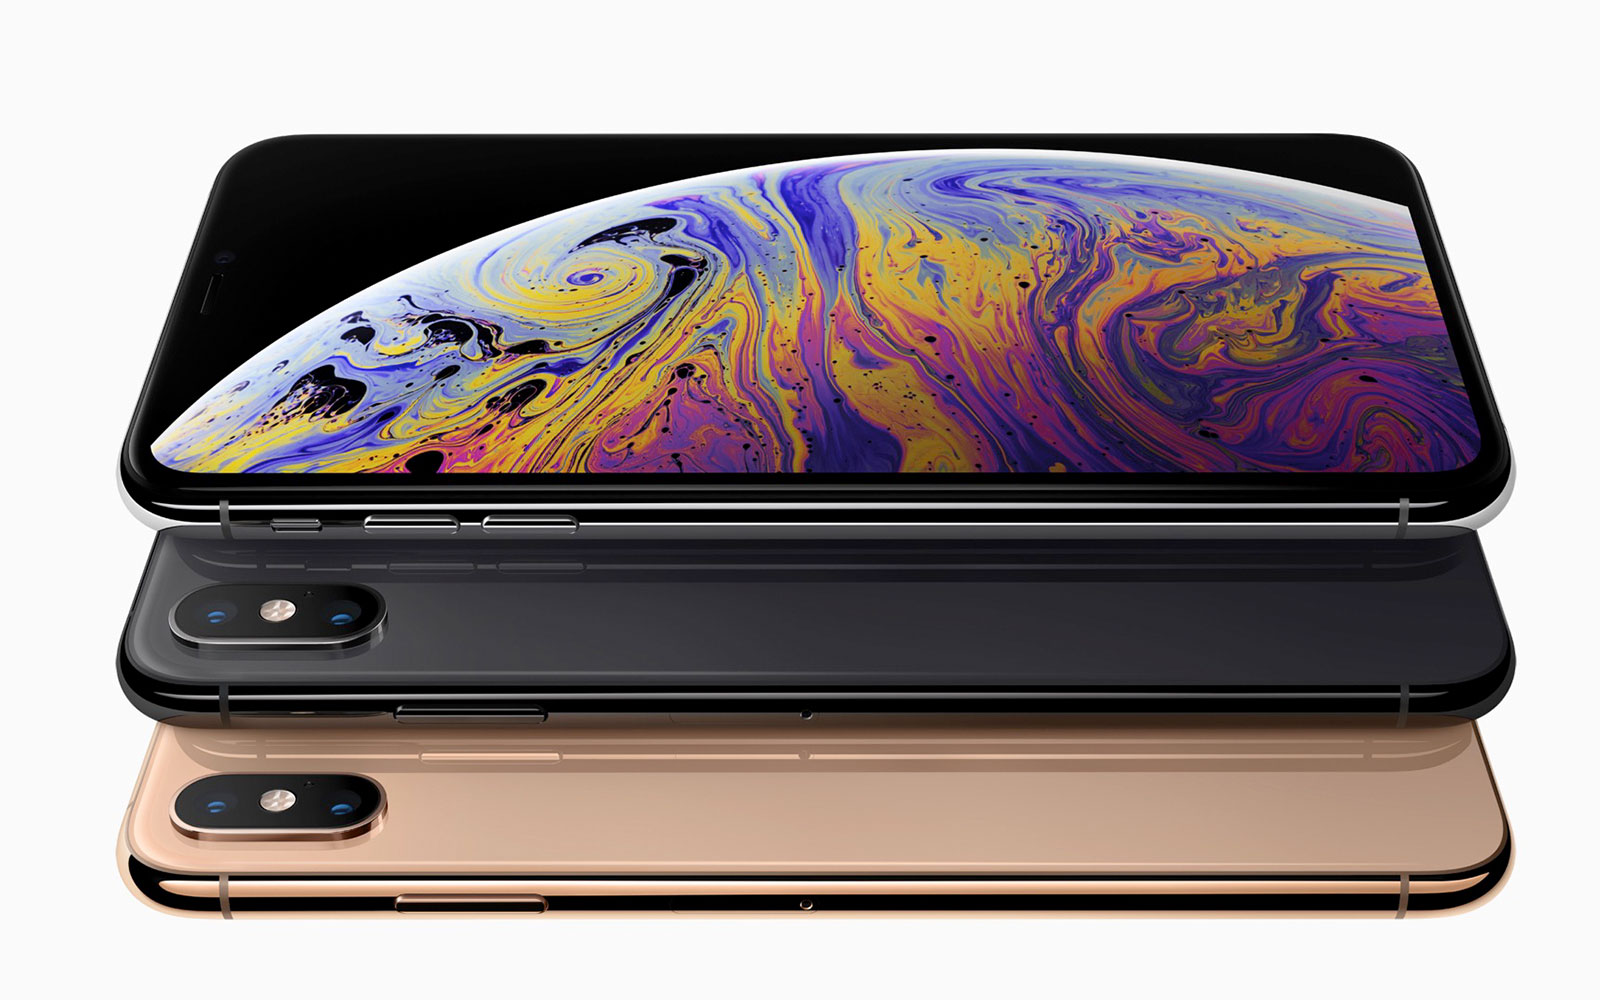 Apple's iPhone Xs and Xs Max are all about the display